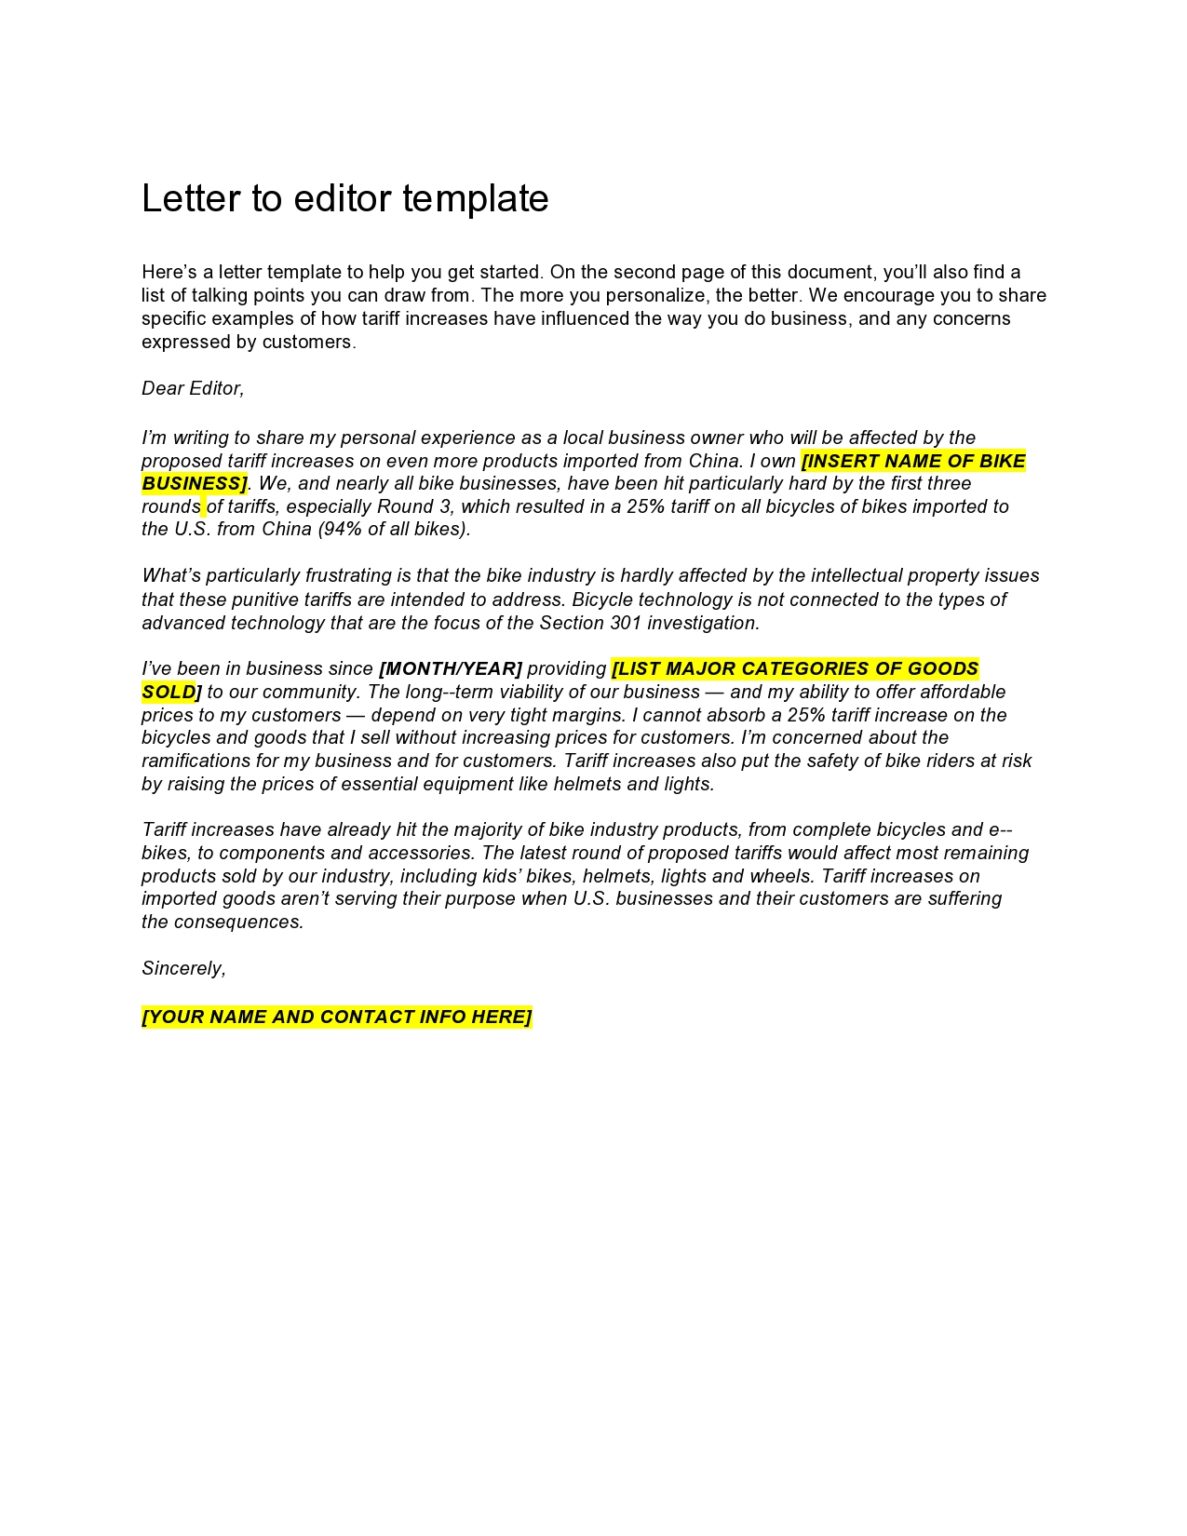 30 Professional Letter To The Editor Templates - TemplateArchive